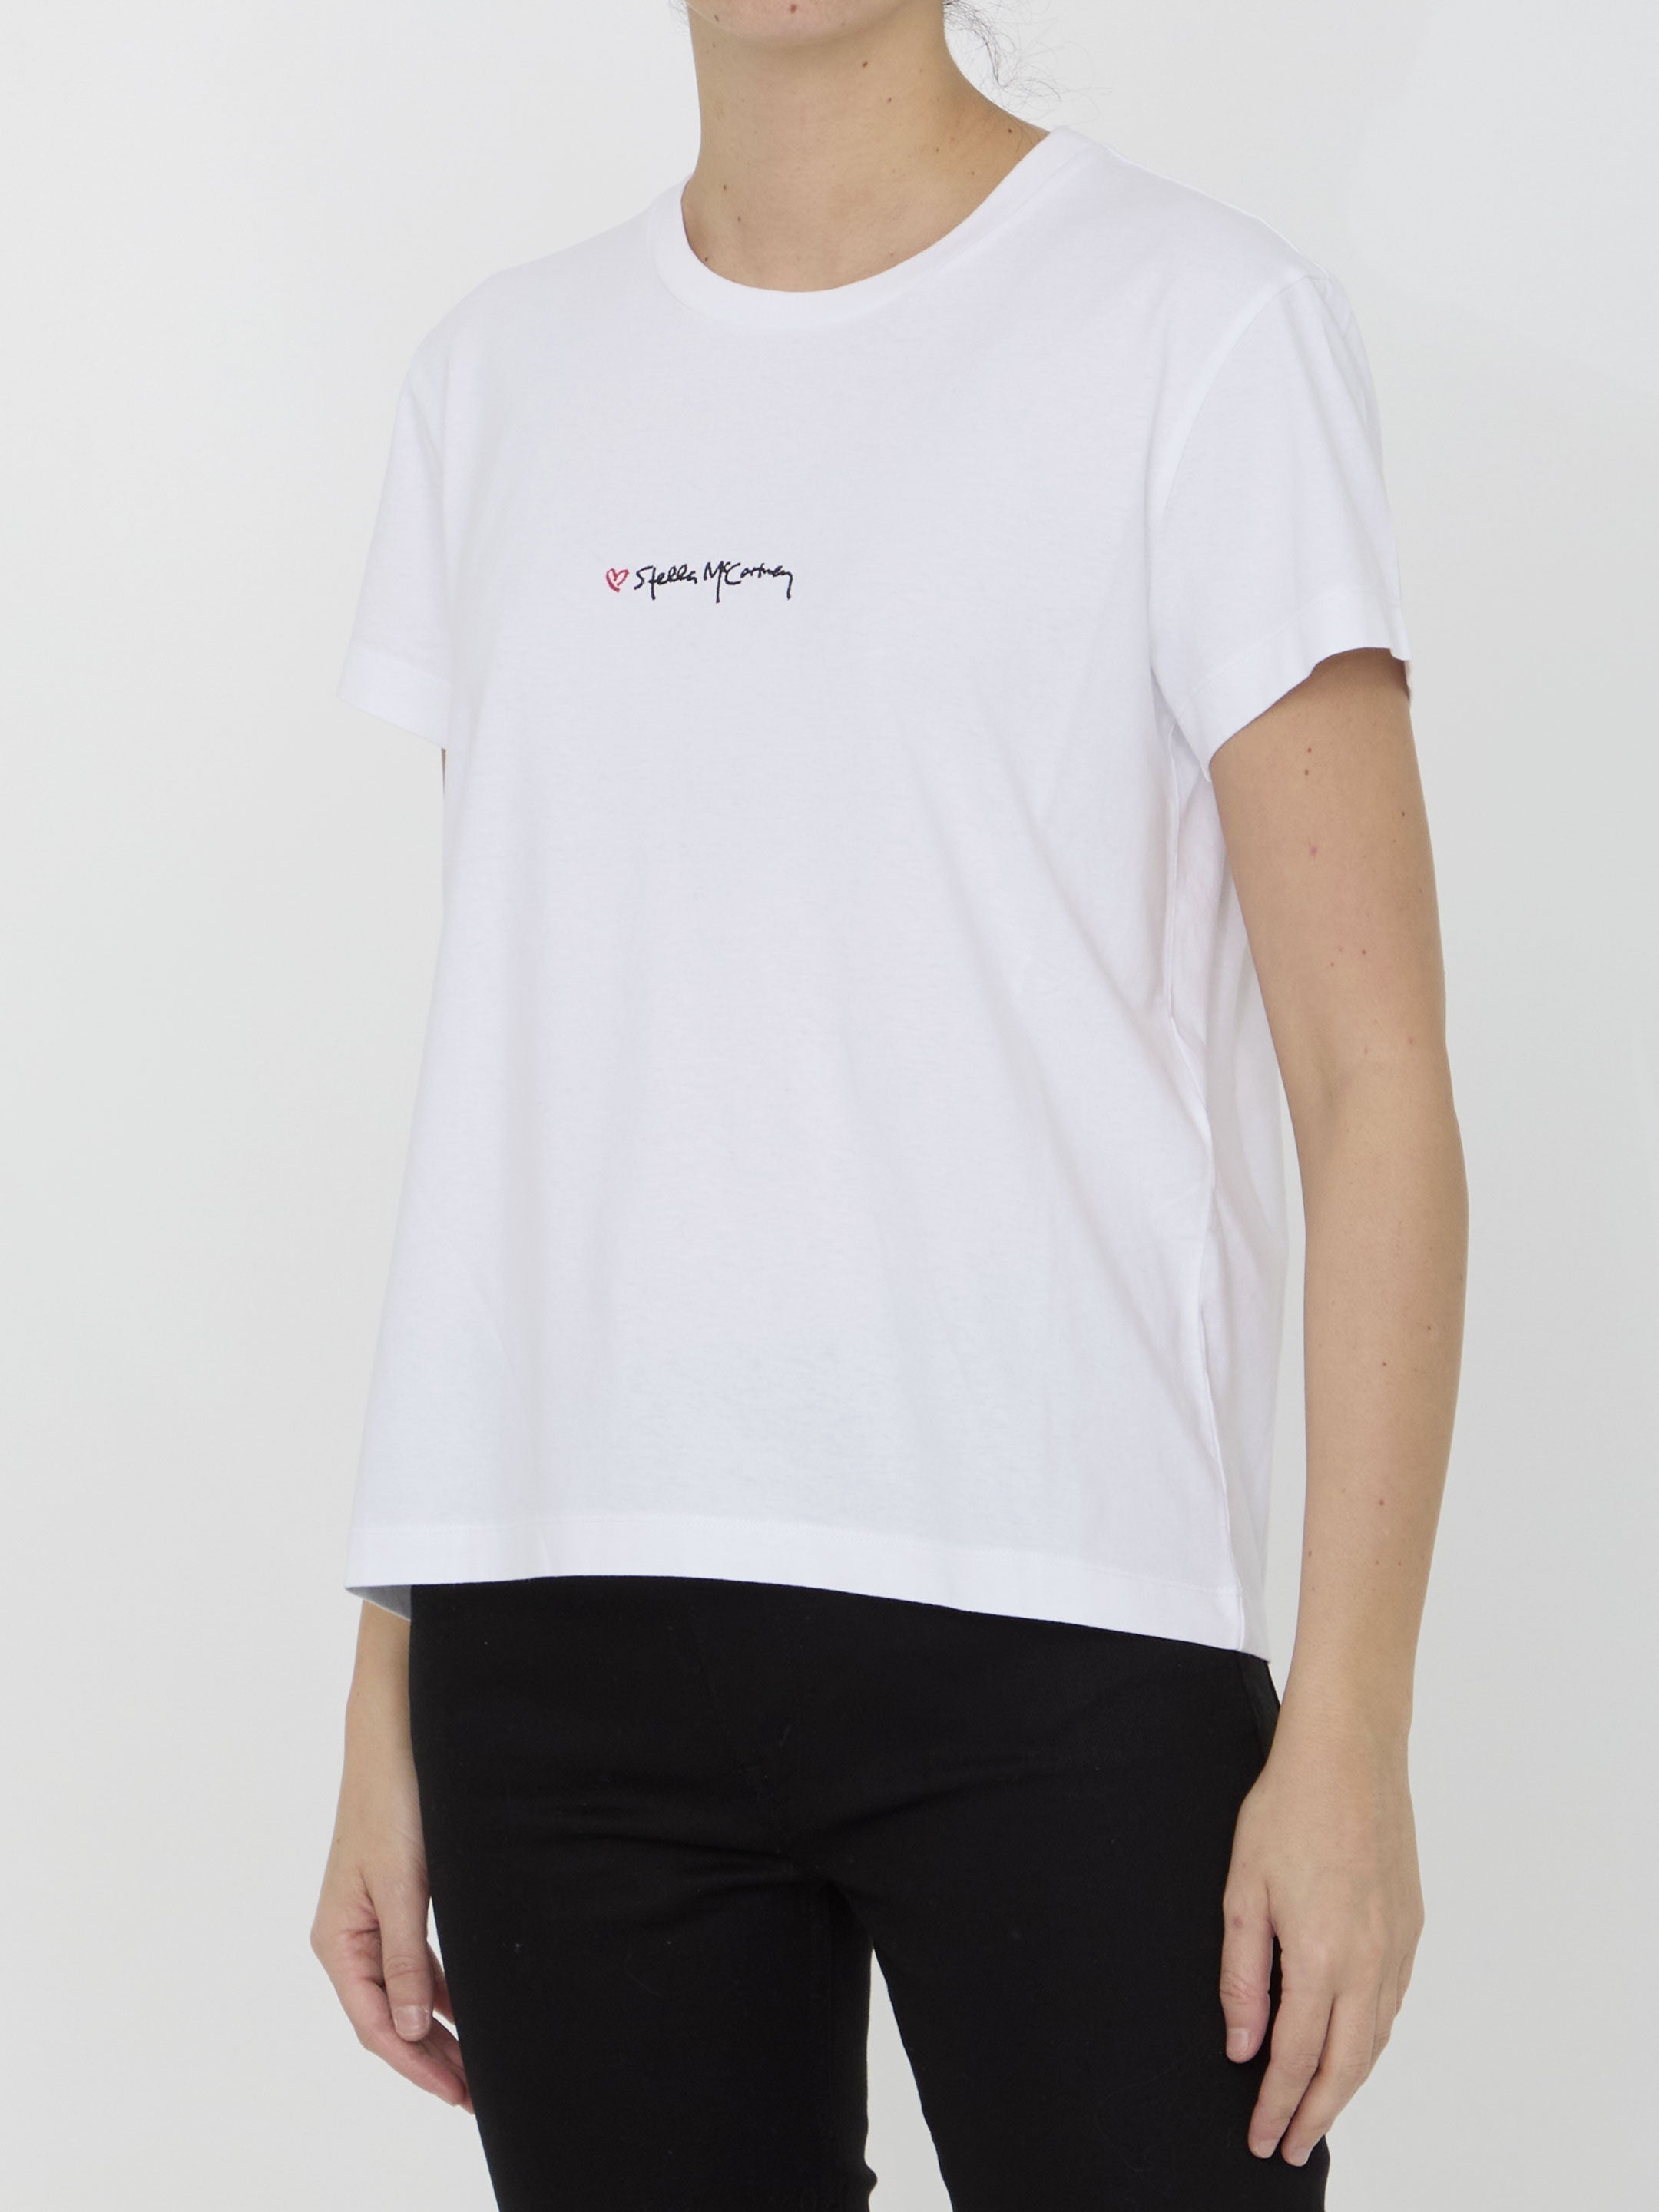 STELLA-MCCARTNEY-OUTLET-SALE-Embroidered-t-shirt-Shirts-ARCHIVE-COLLECTION-2.jpg